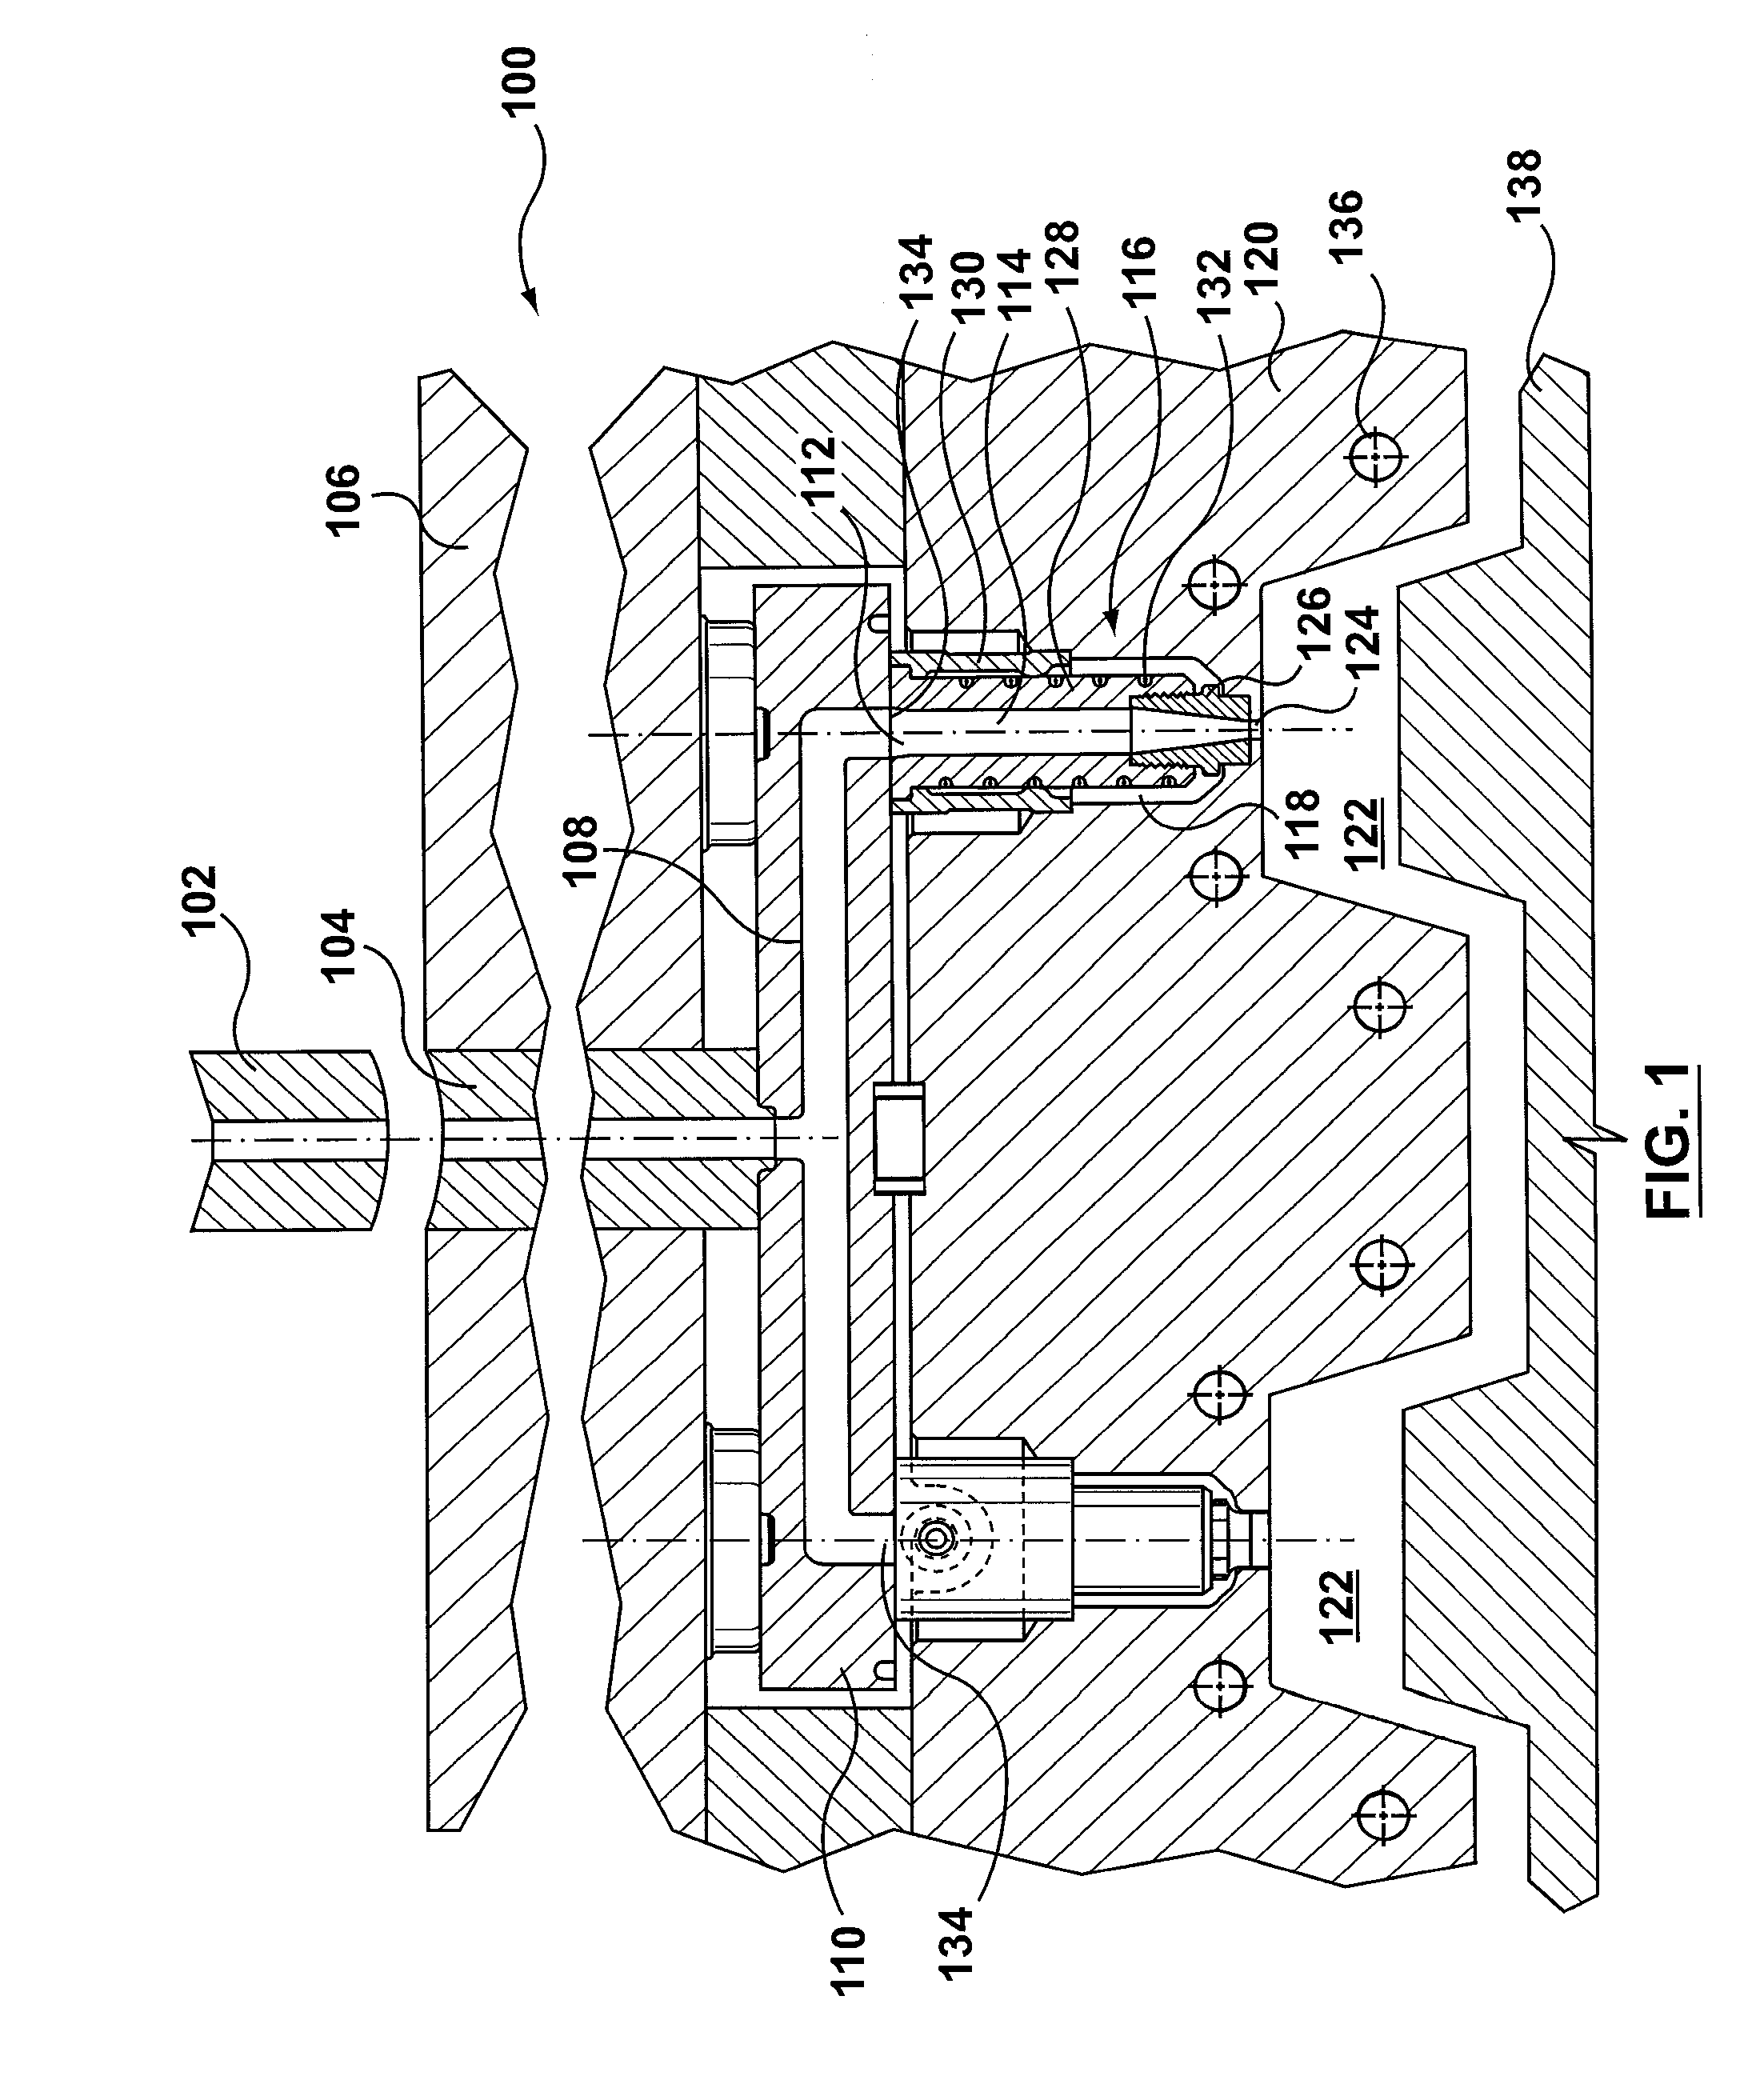 Open Loop Pressure Control For Injection Molding